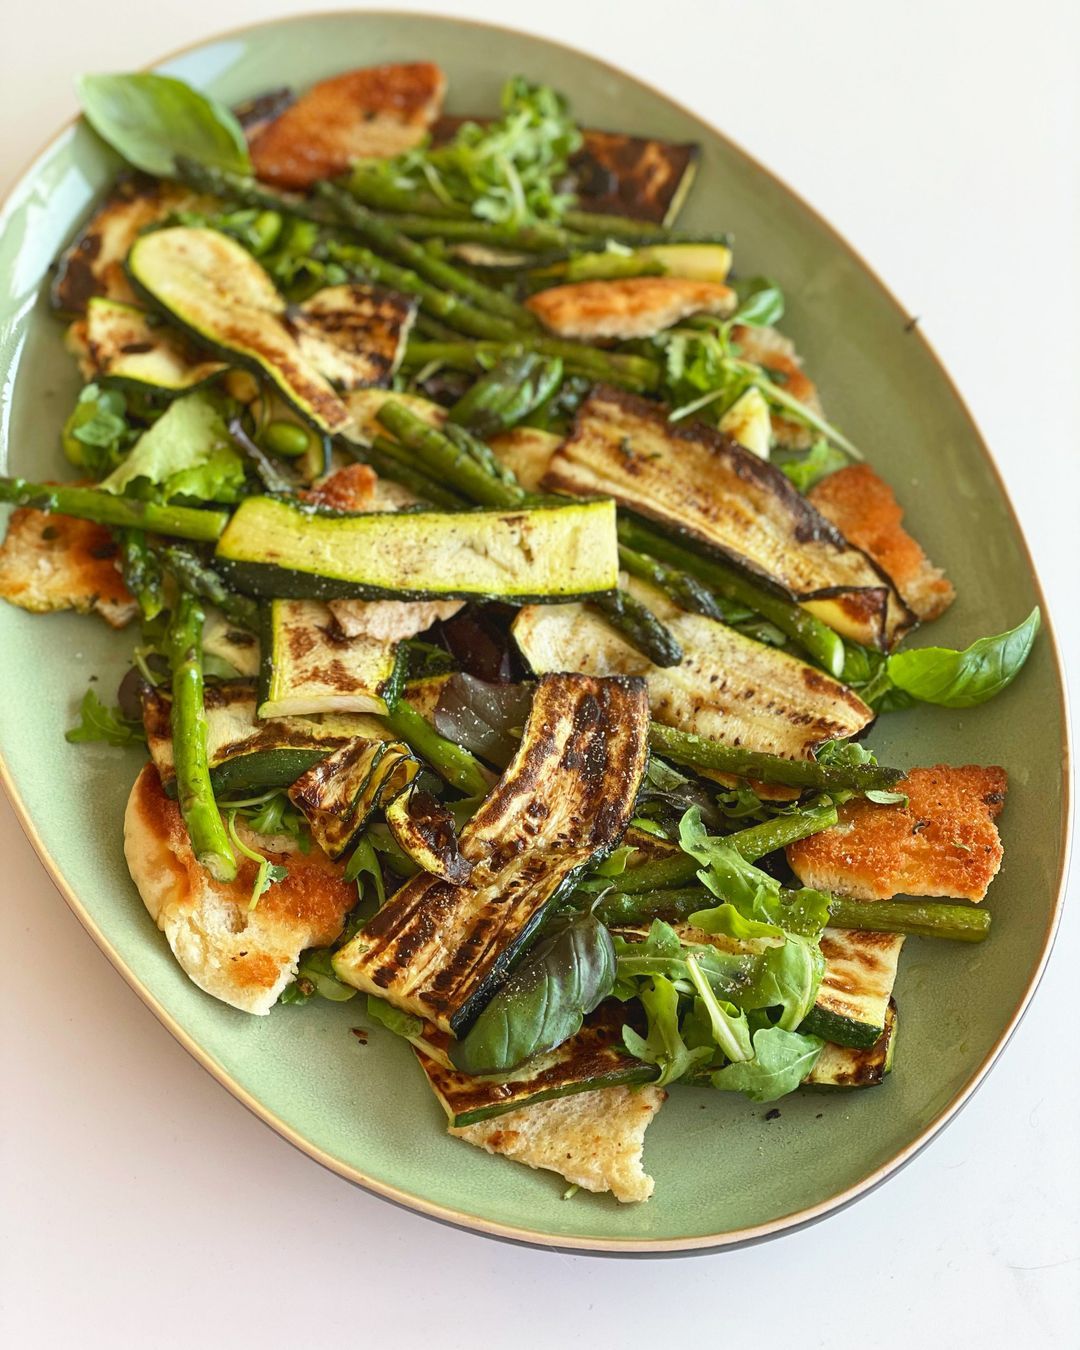 Kind of Fattoush salad with roasted zucchini